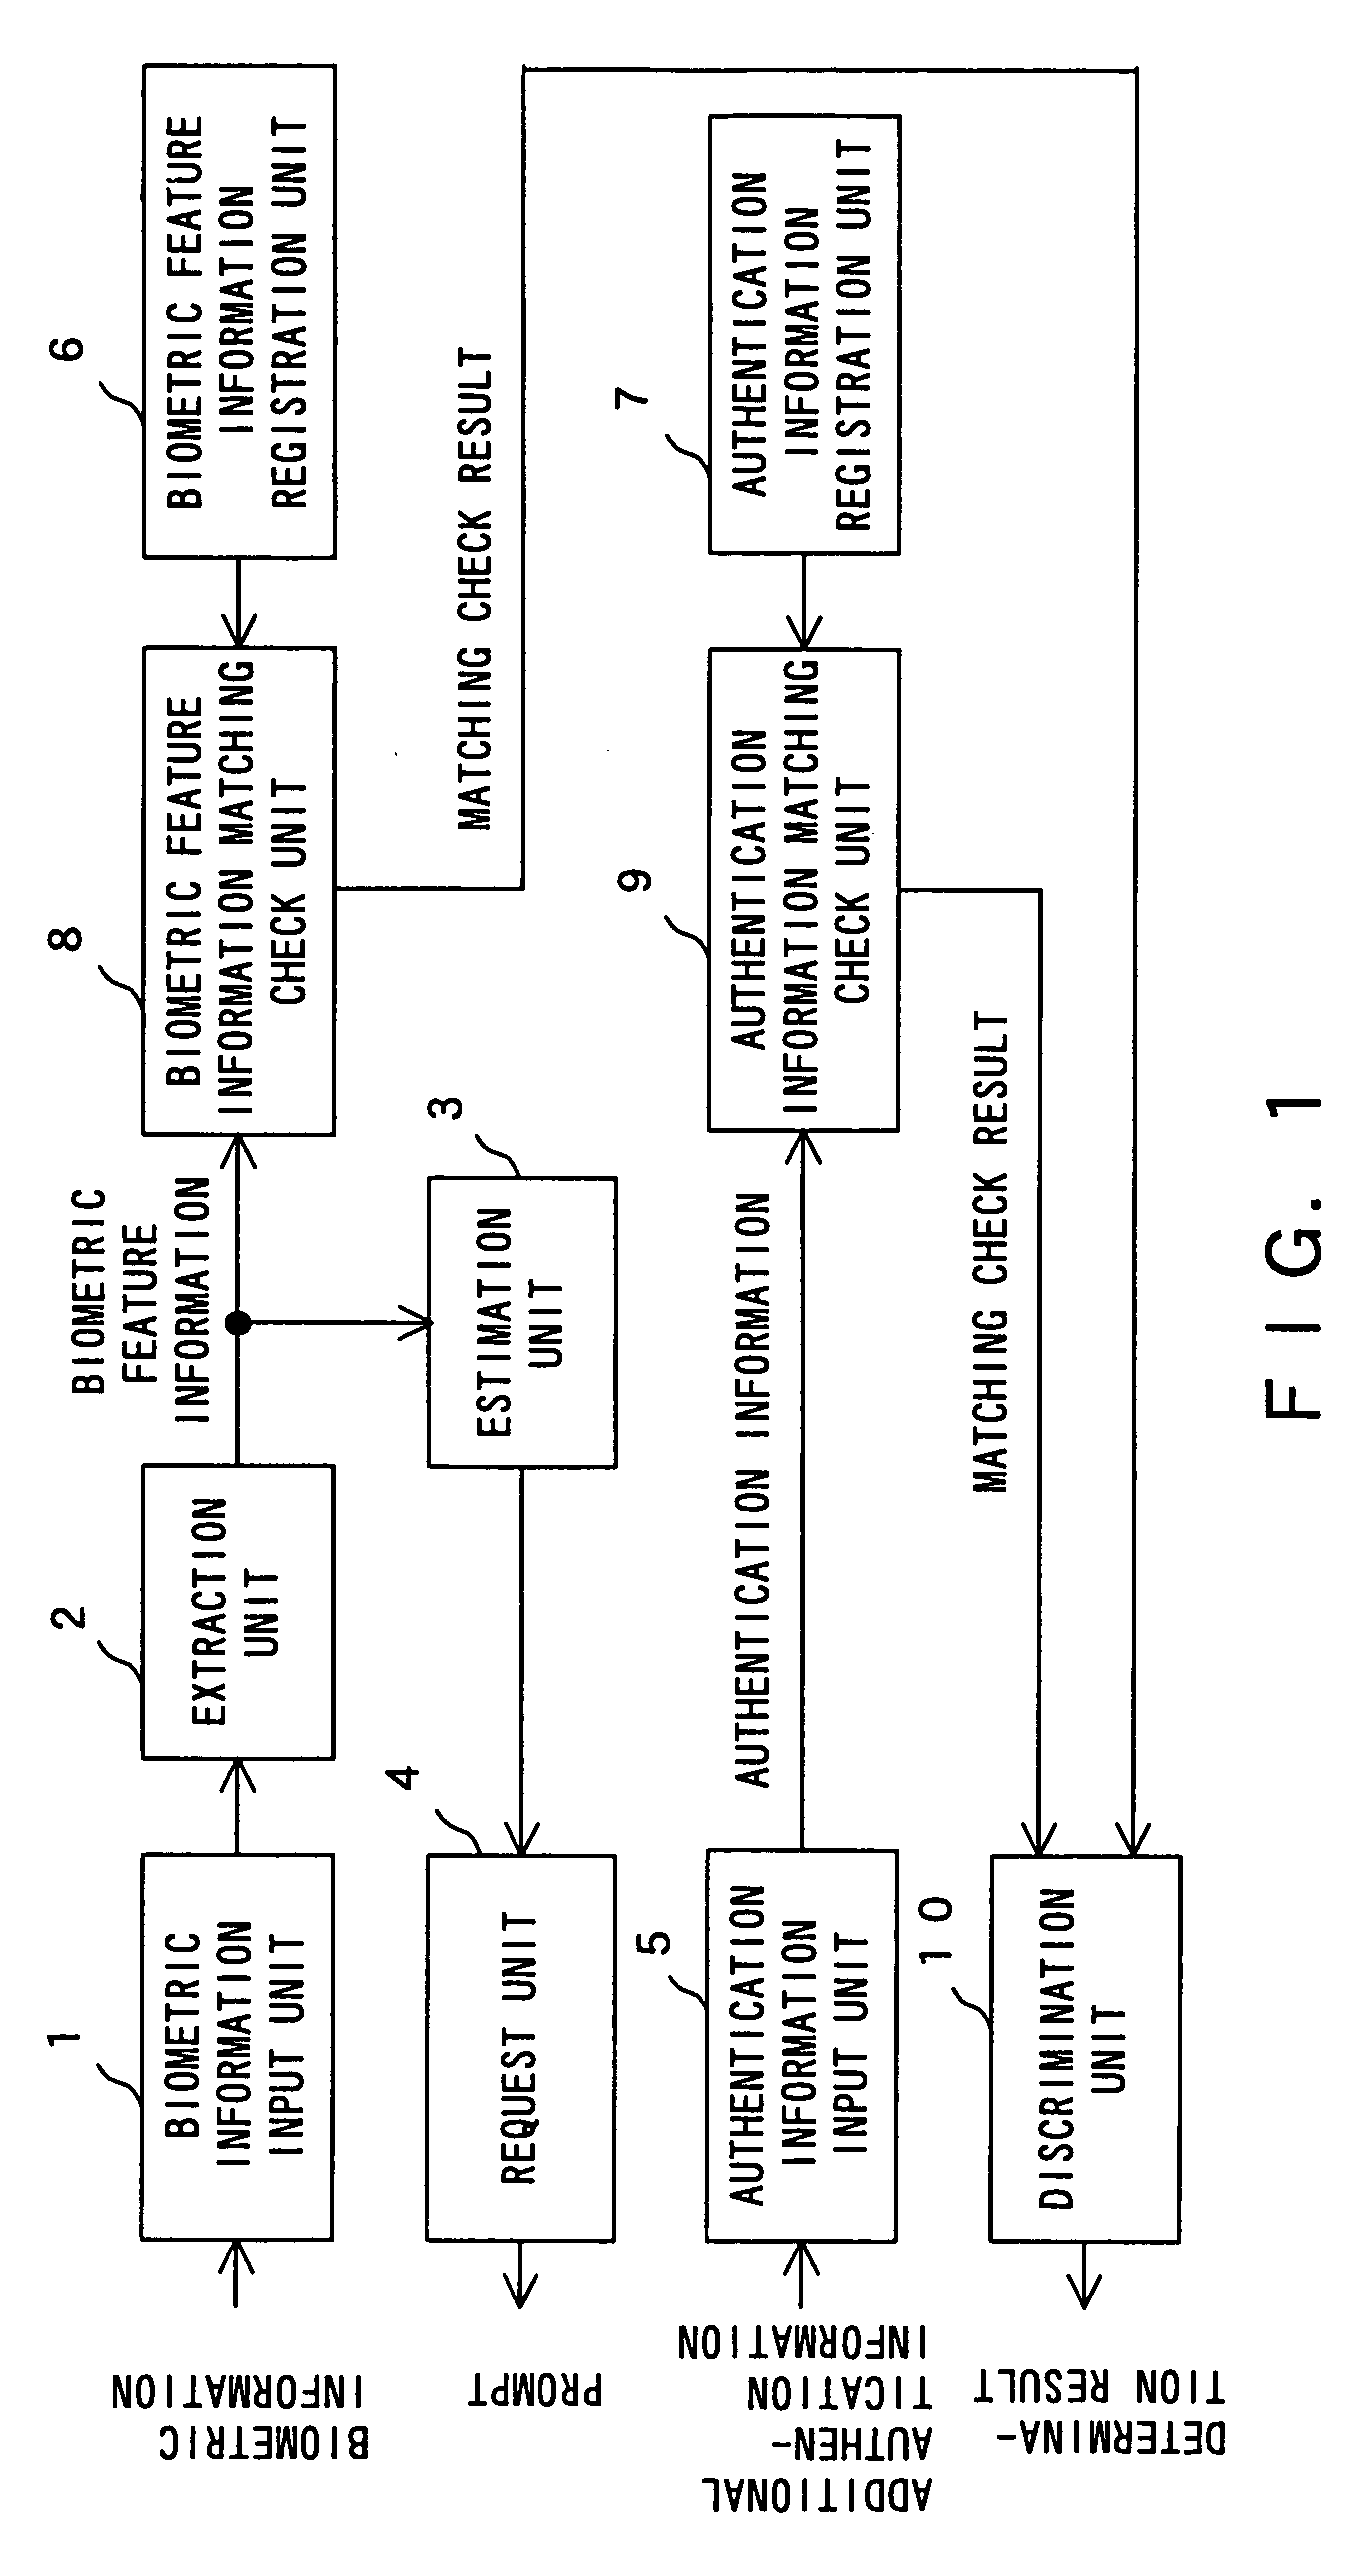 Apparatus and method for authenticating user according to biometric information